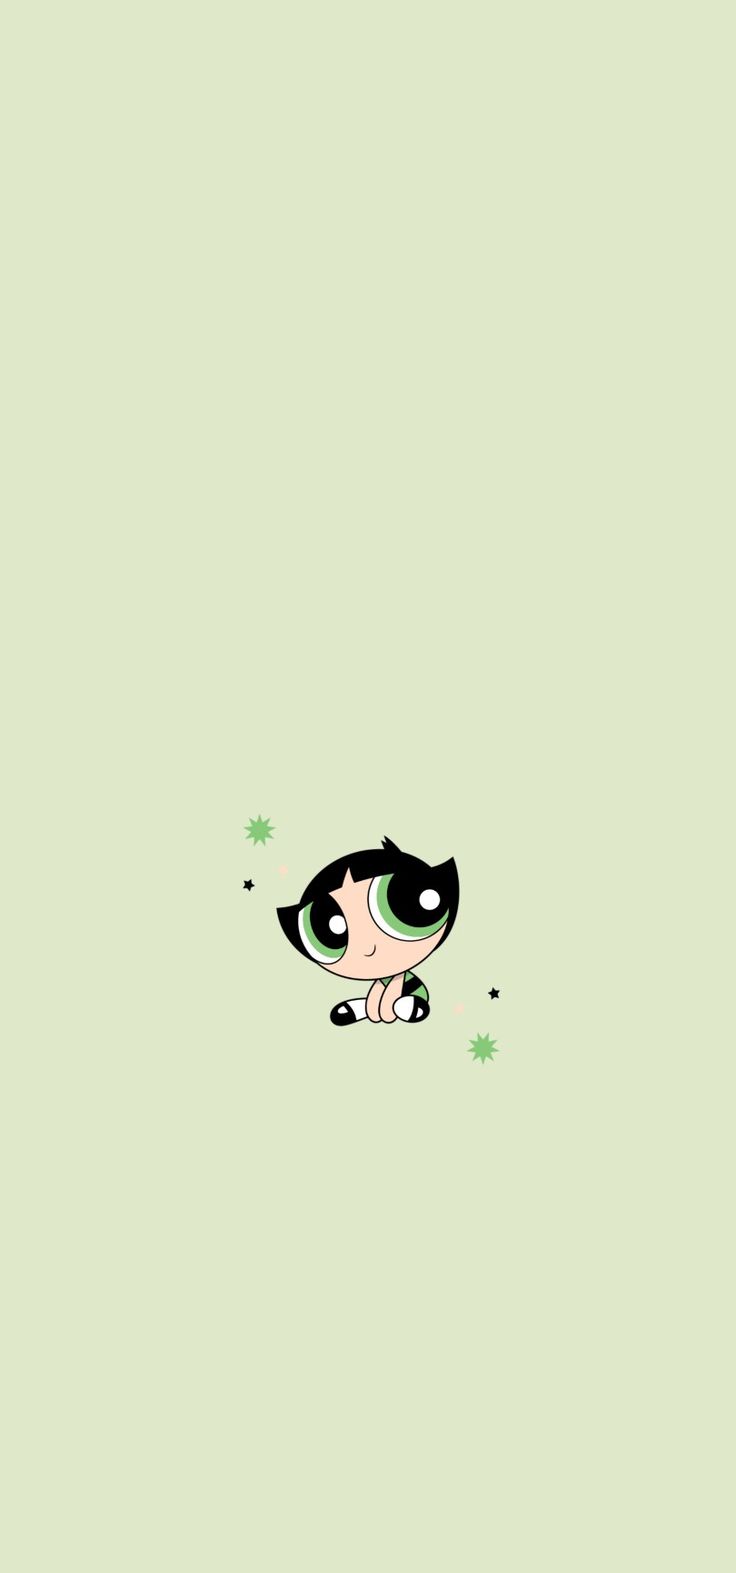 The powerpuff girls wallpaper for your phone - Pastel green, light green, Android, Buttercup